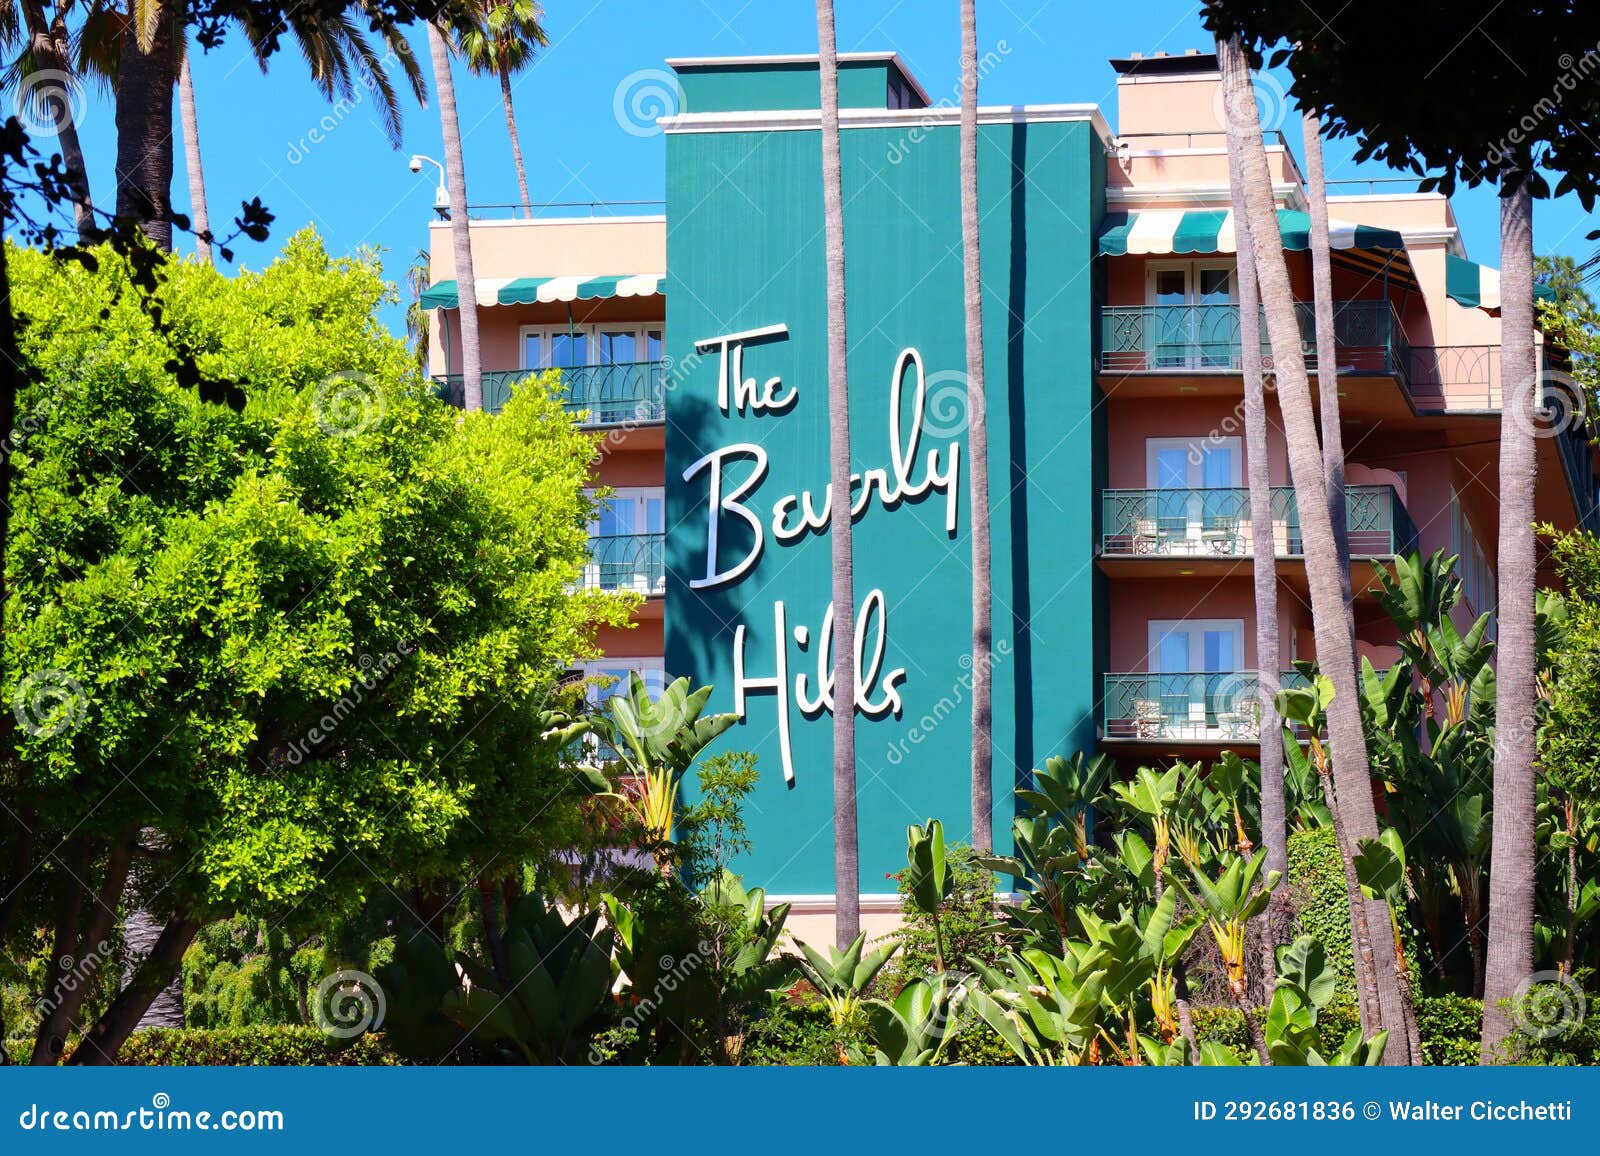 The Beverly Hills Hotel at 9641 Sunset Boulevard, Beverly Hills ...